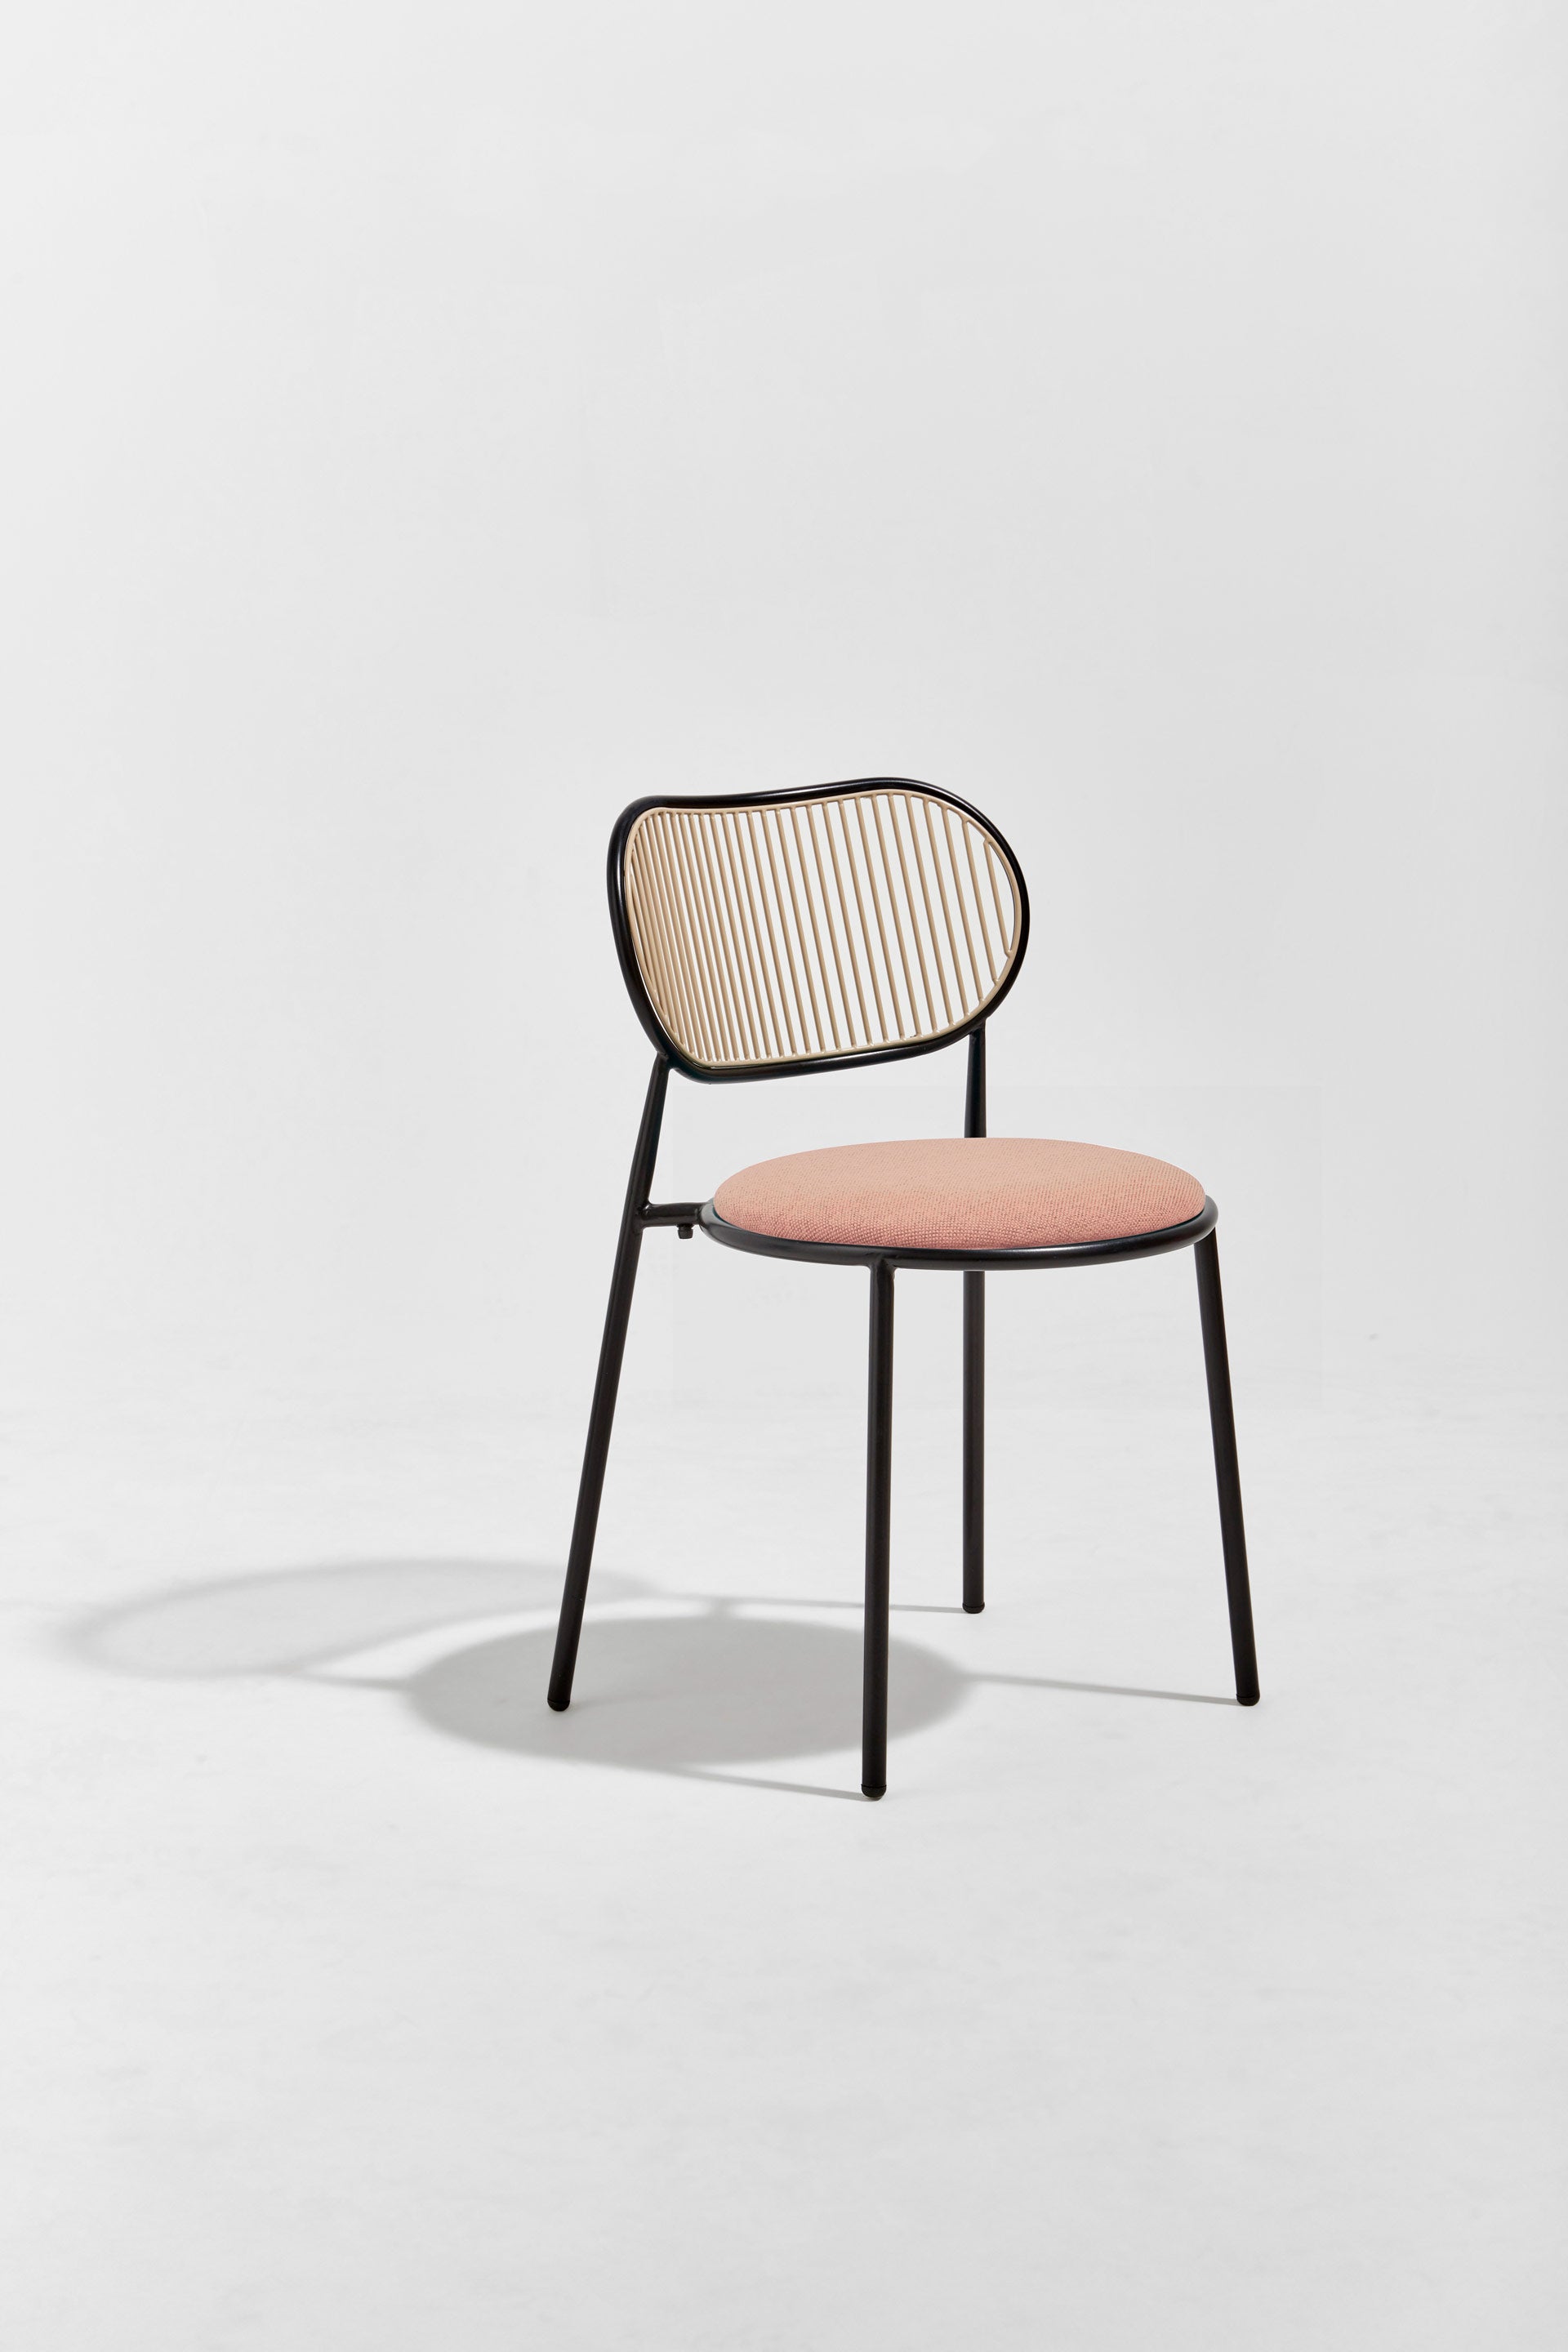 Piper Dining Chair Upholstered | Fabric or Leather Seat Stackable | Designed by GibsonKarlo | DesignByThem ** HF2 Mode - 021 Blush